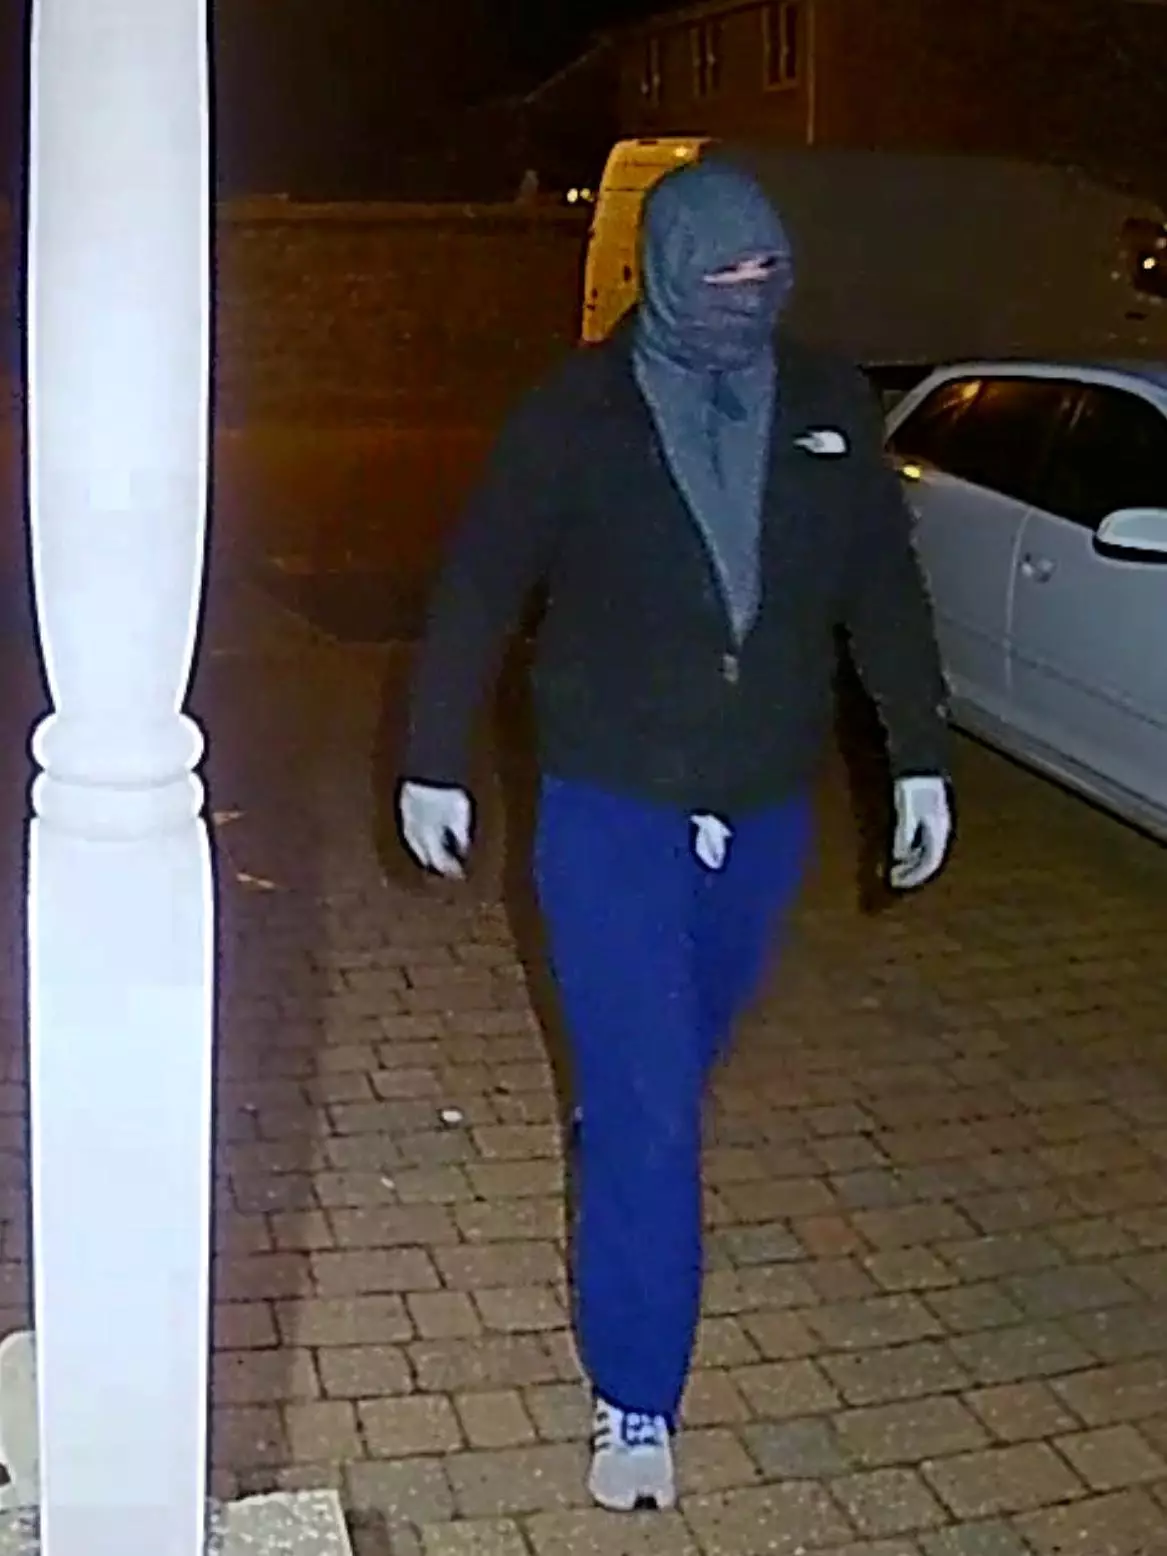 The masked man stole food meant for an elderly man who is isolation due to coronavirus.